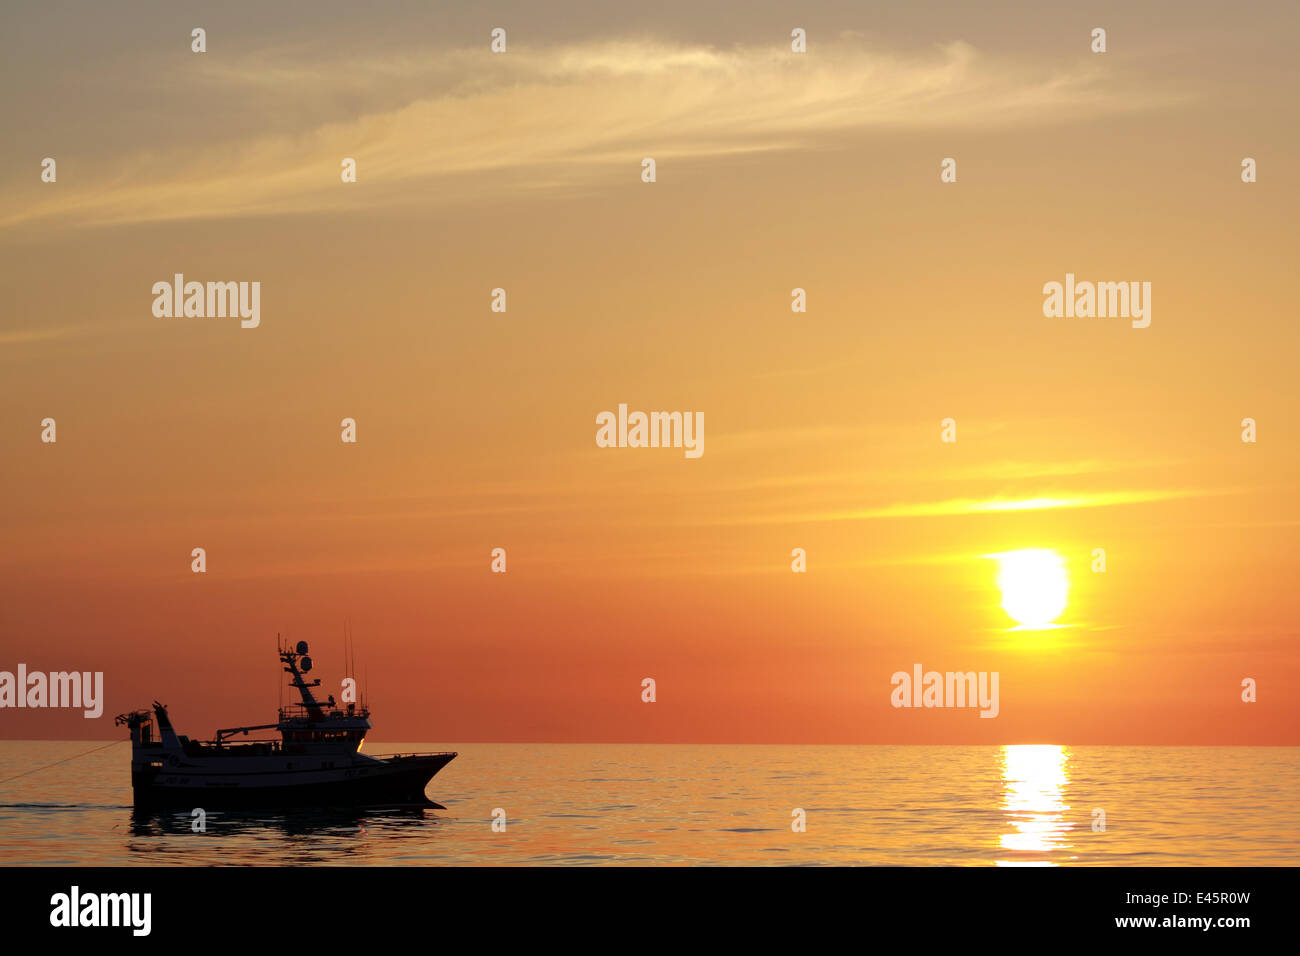 Trawling on the North Sea in calm conditions at sunset, May 2010. Property released. Stock Photo